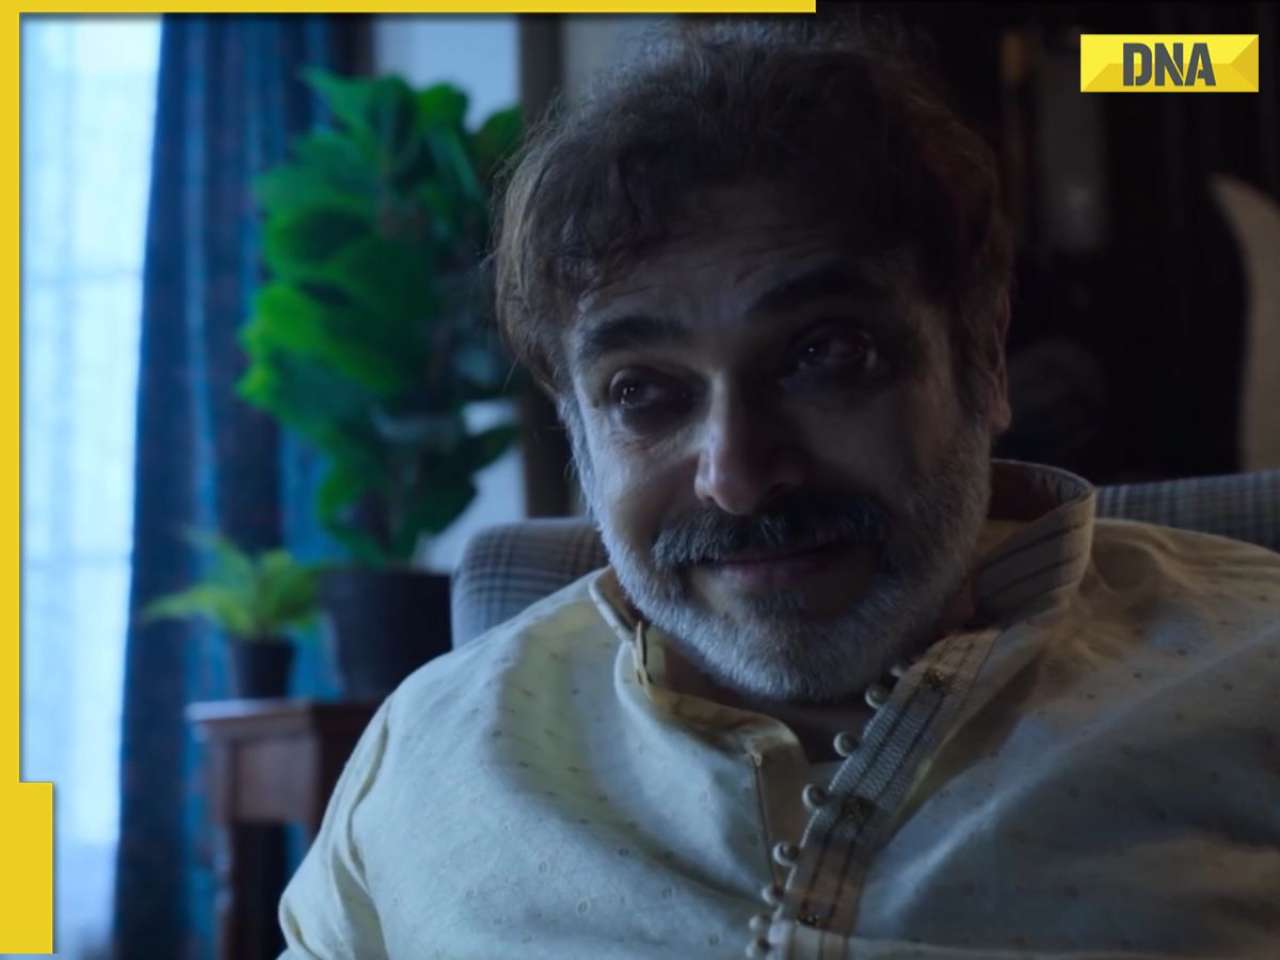 Undekhi Season 3 trailer: Wounded Papaji aka Harsh Chhaya is hunted by his past, tries to reclaim power; fans react